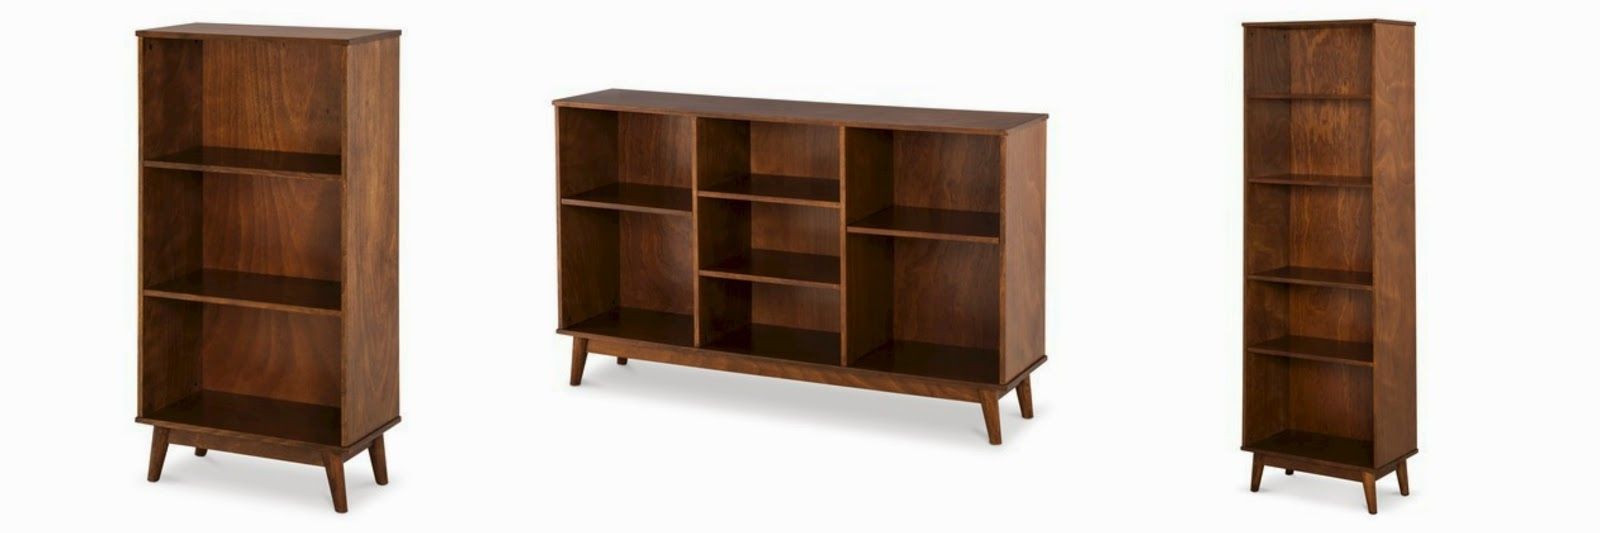 Mid Century Moderntarget – Liz Daigle Real Estate With Regard To 2018 Mid Century Bookcases (View 12 of 15)